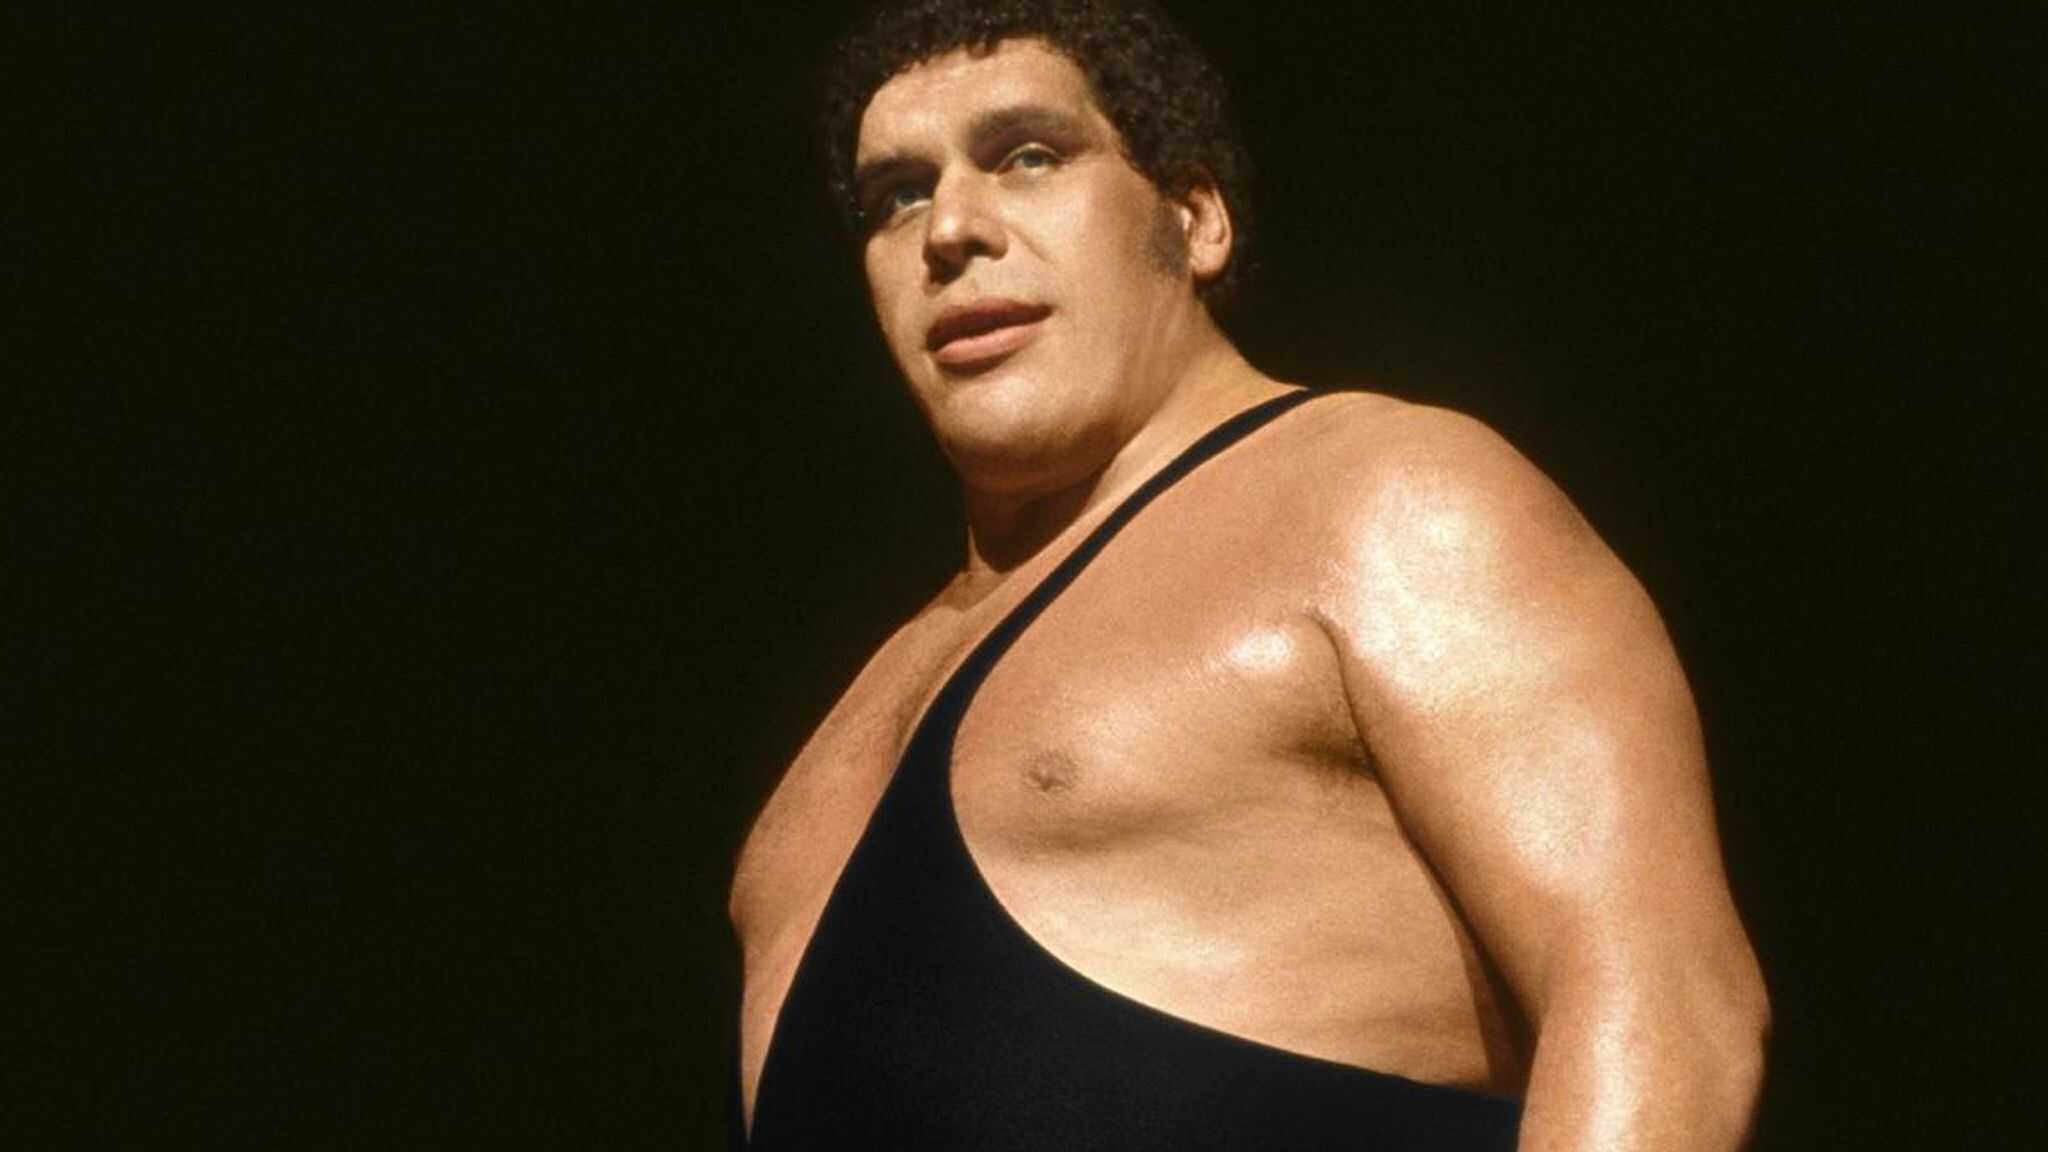 Image of Andre the Giant